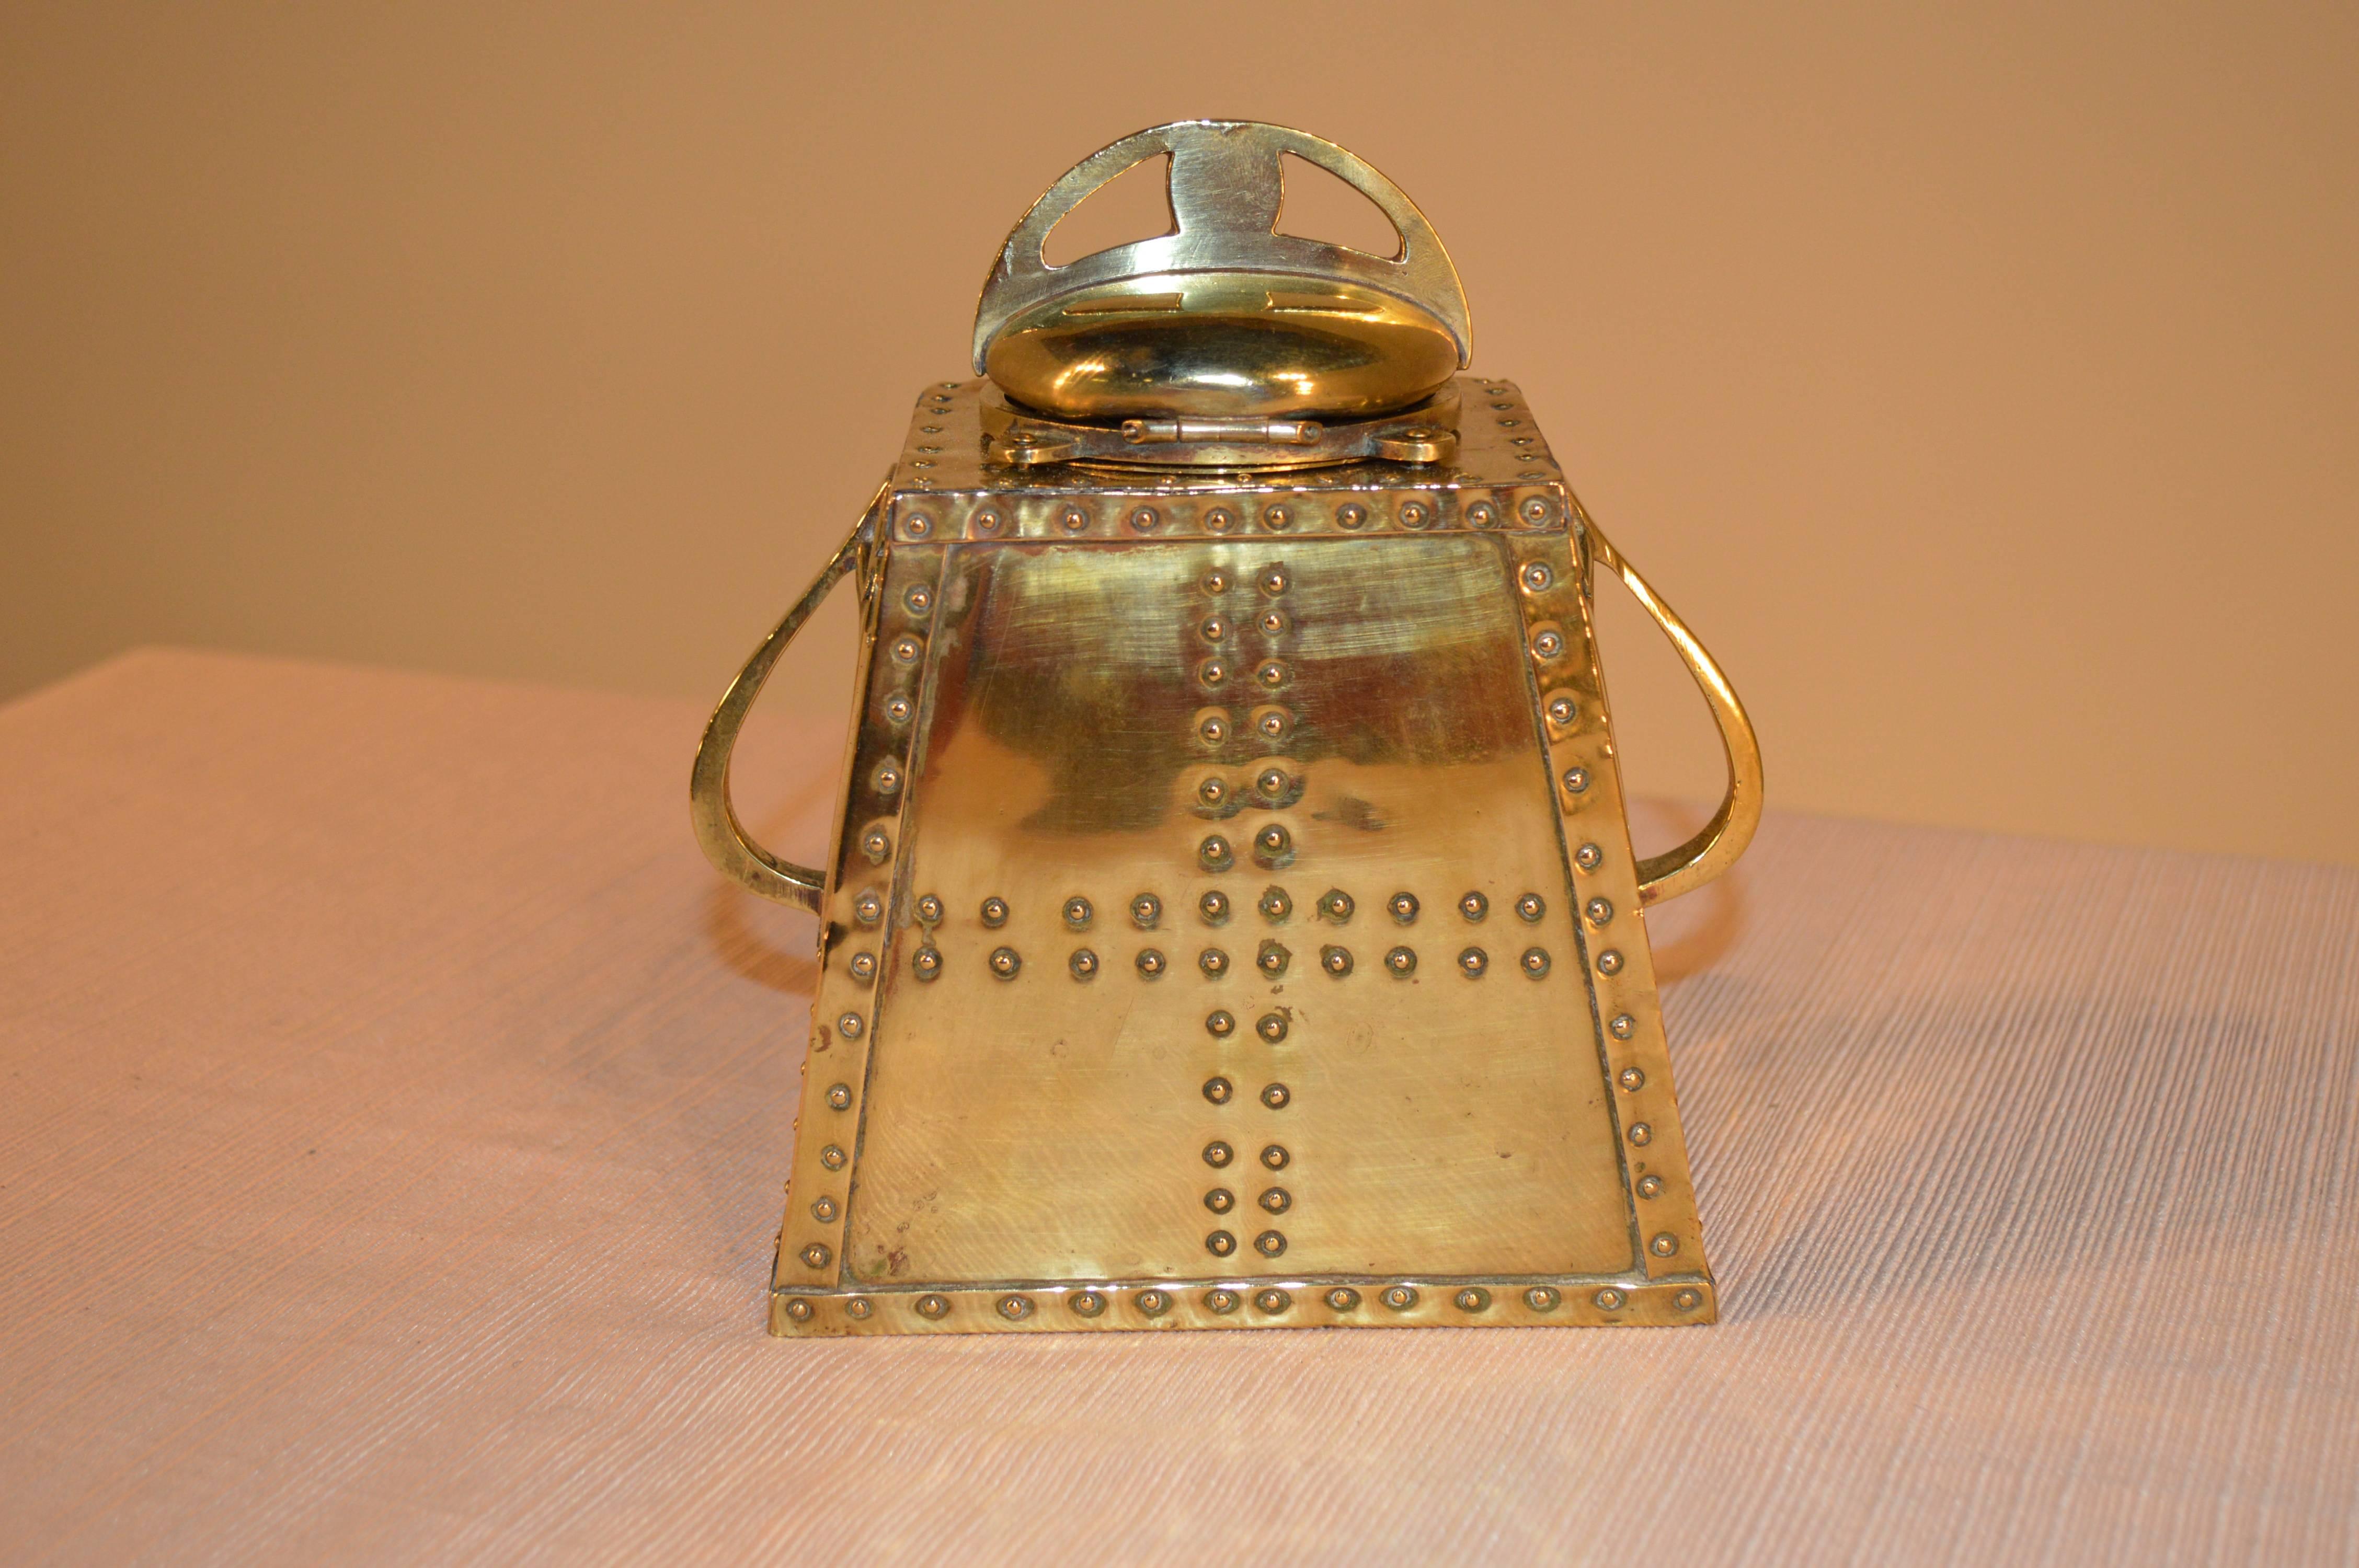 Late 19th century brass inkwell. The top lifts to reveal a porcelain inkwell. The base is detailed with rivets and on the front has a horses profile surrounded by a horseshoe, with a pen rest below.